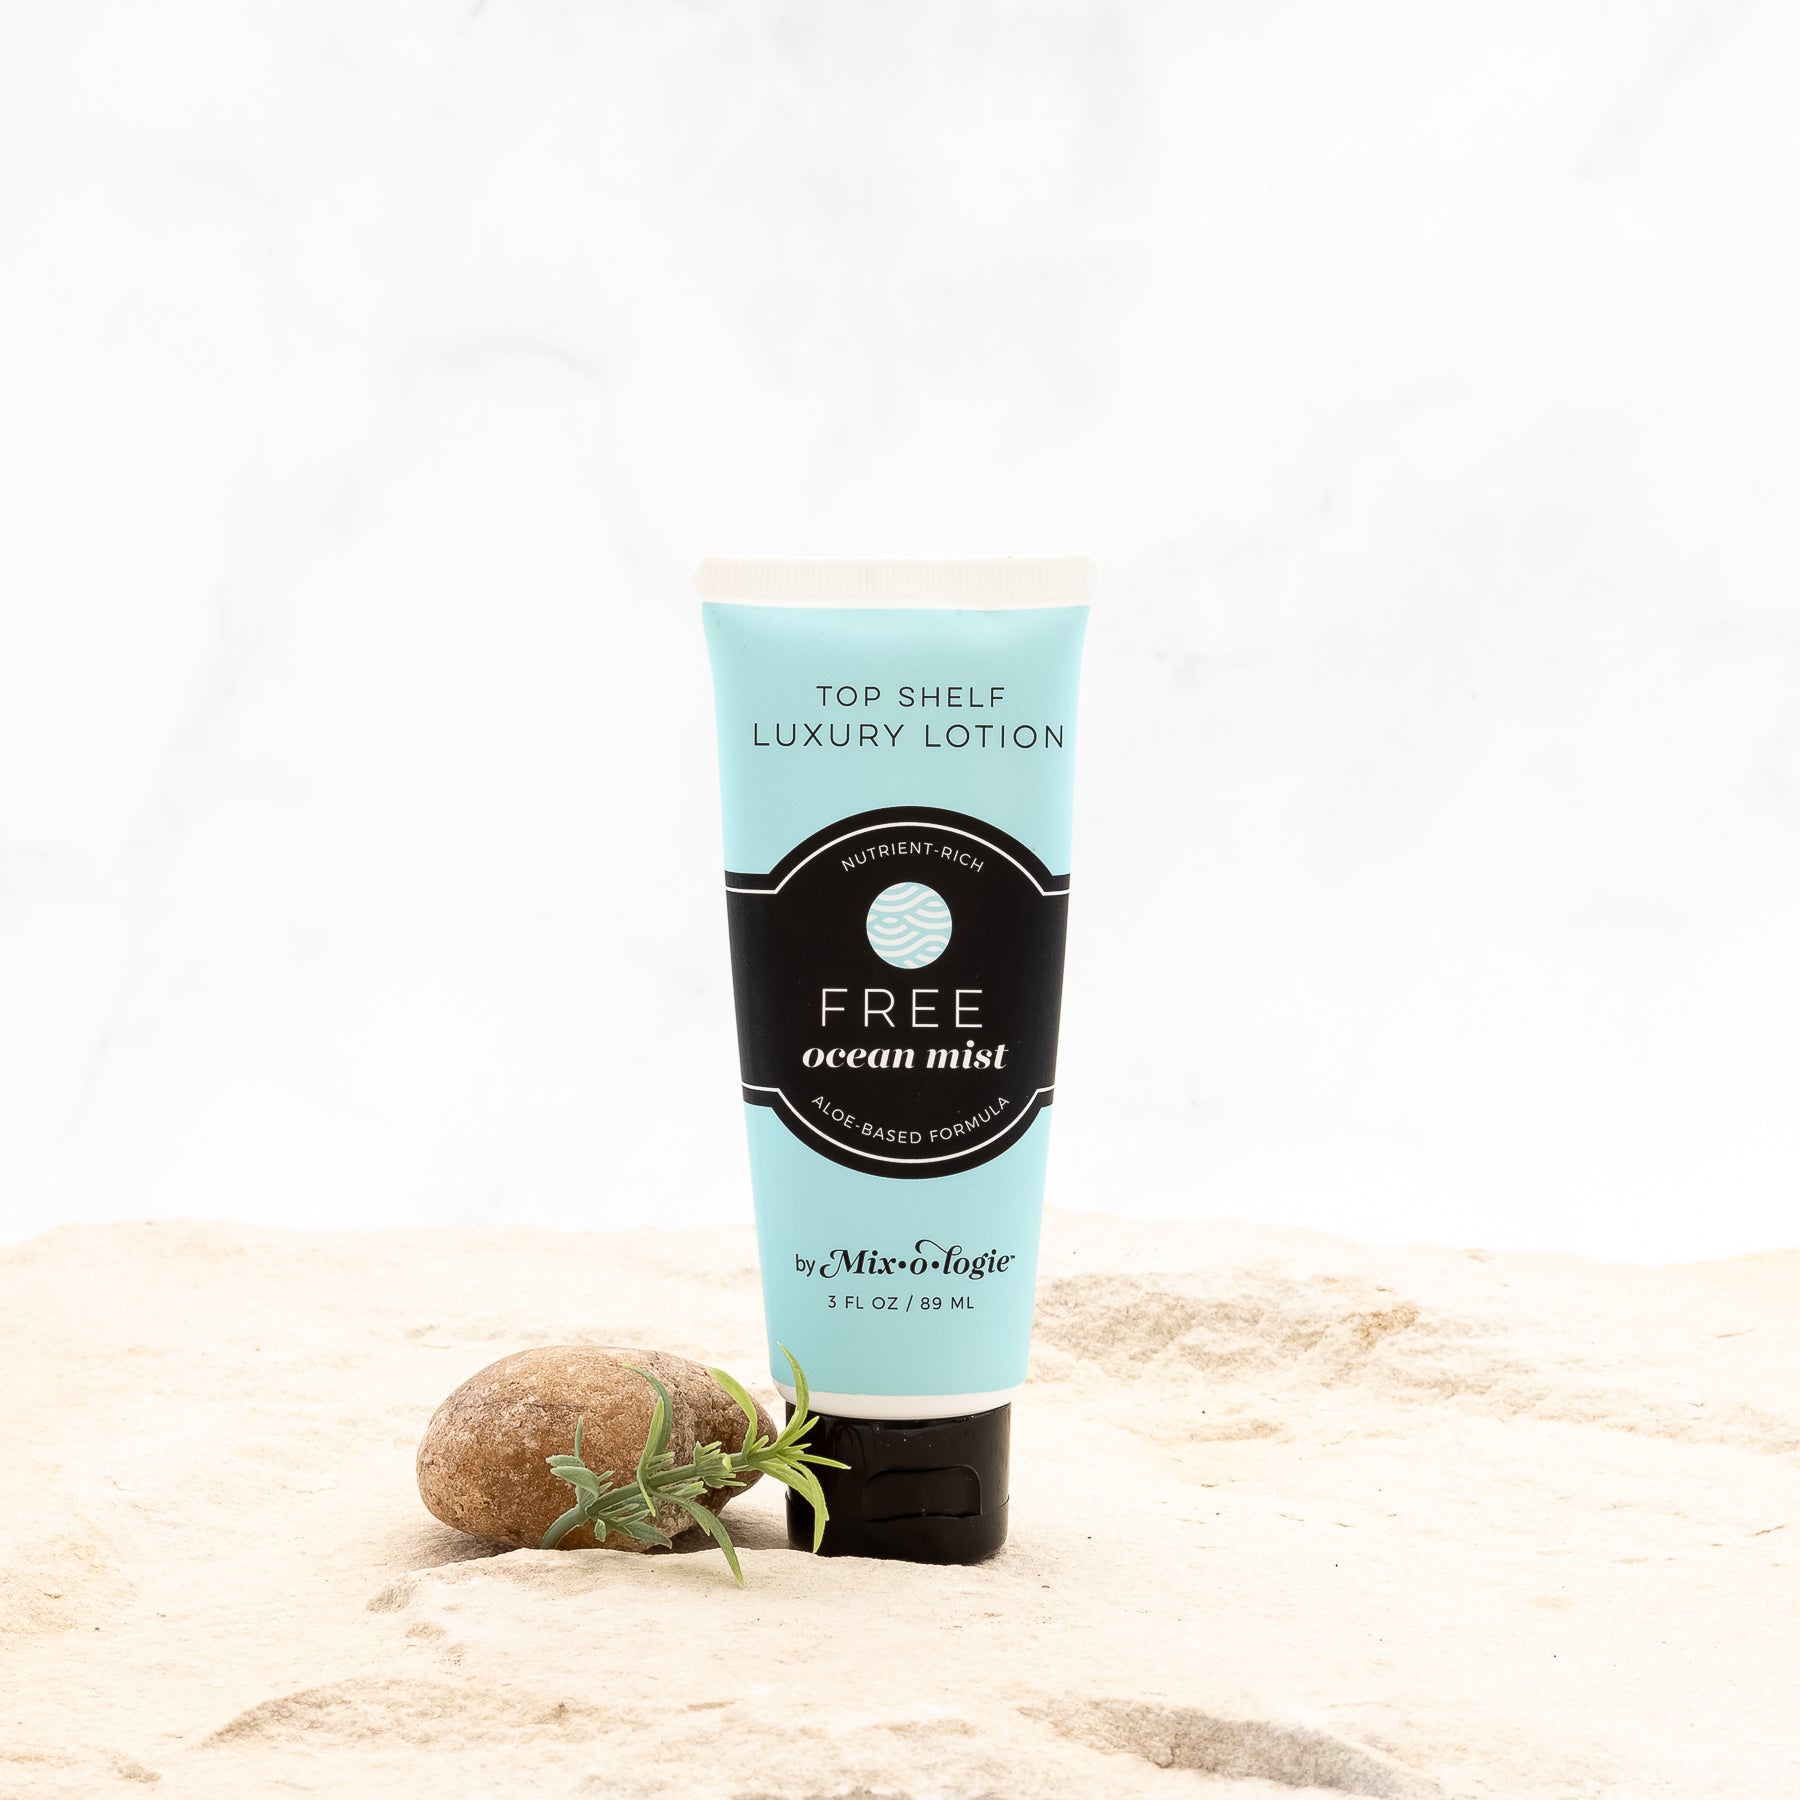 Free (Ocean Mist) Top Shelf Lotion in pale blue tube with black lid and label. Nutrient rich, aloe-based formula, tube has 5 fl oz or 89 mL. Pictured with white background, sand, rocks, and greenery. 